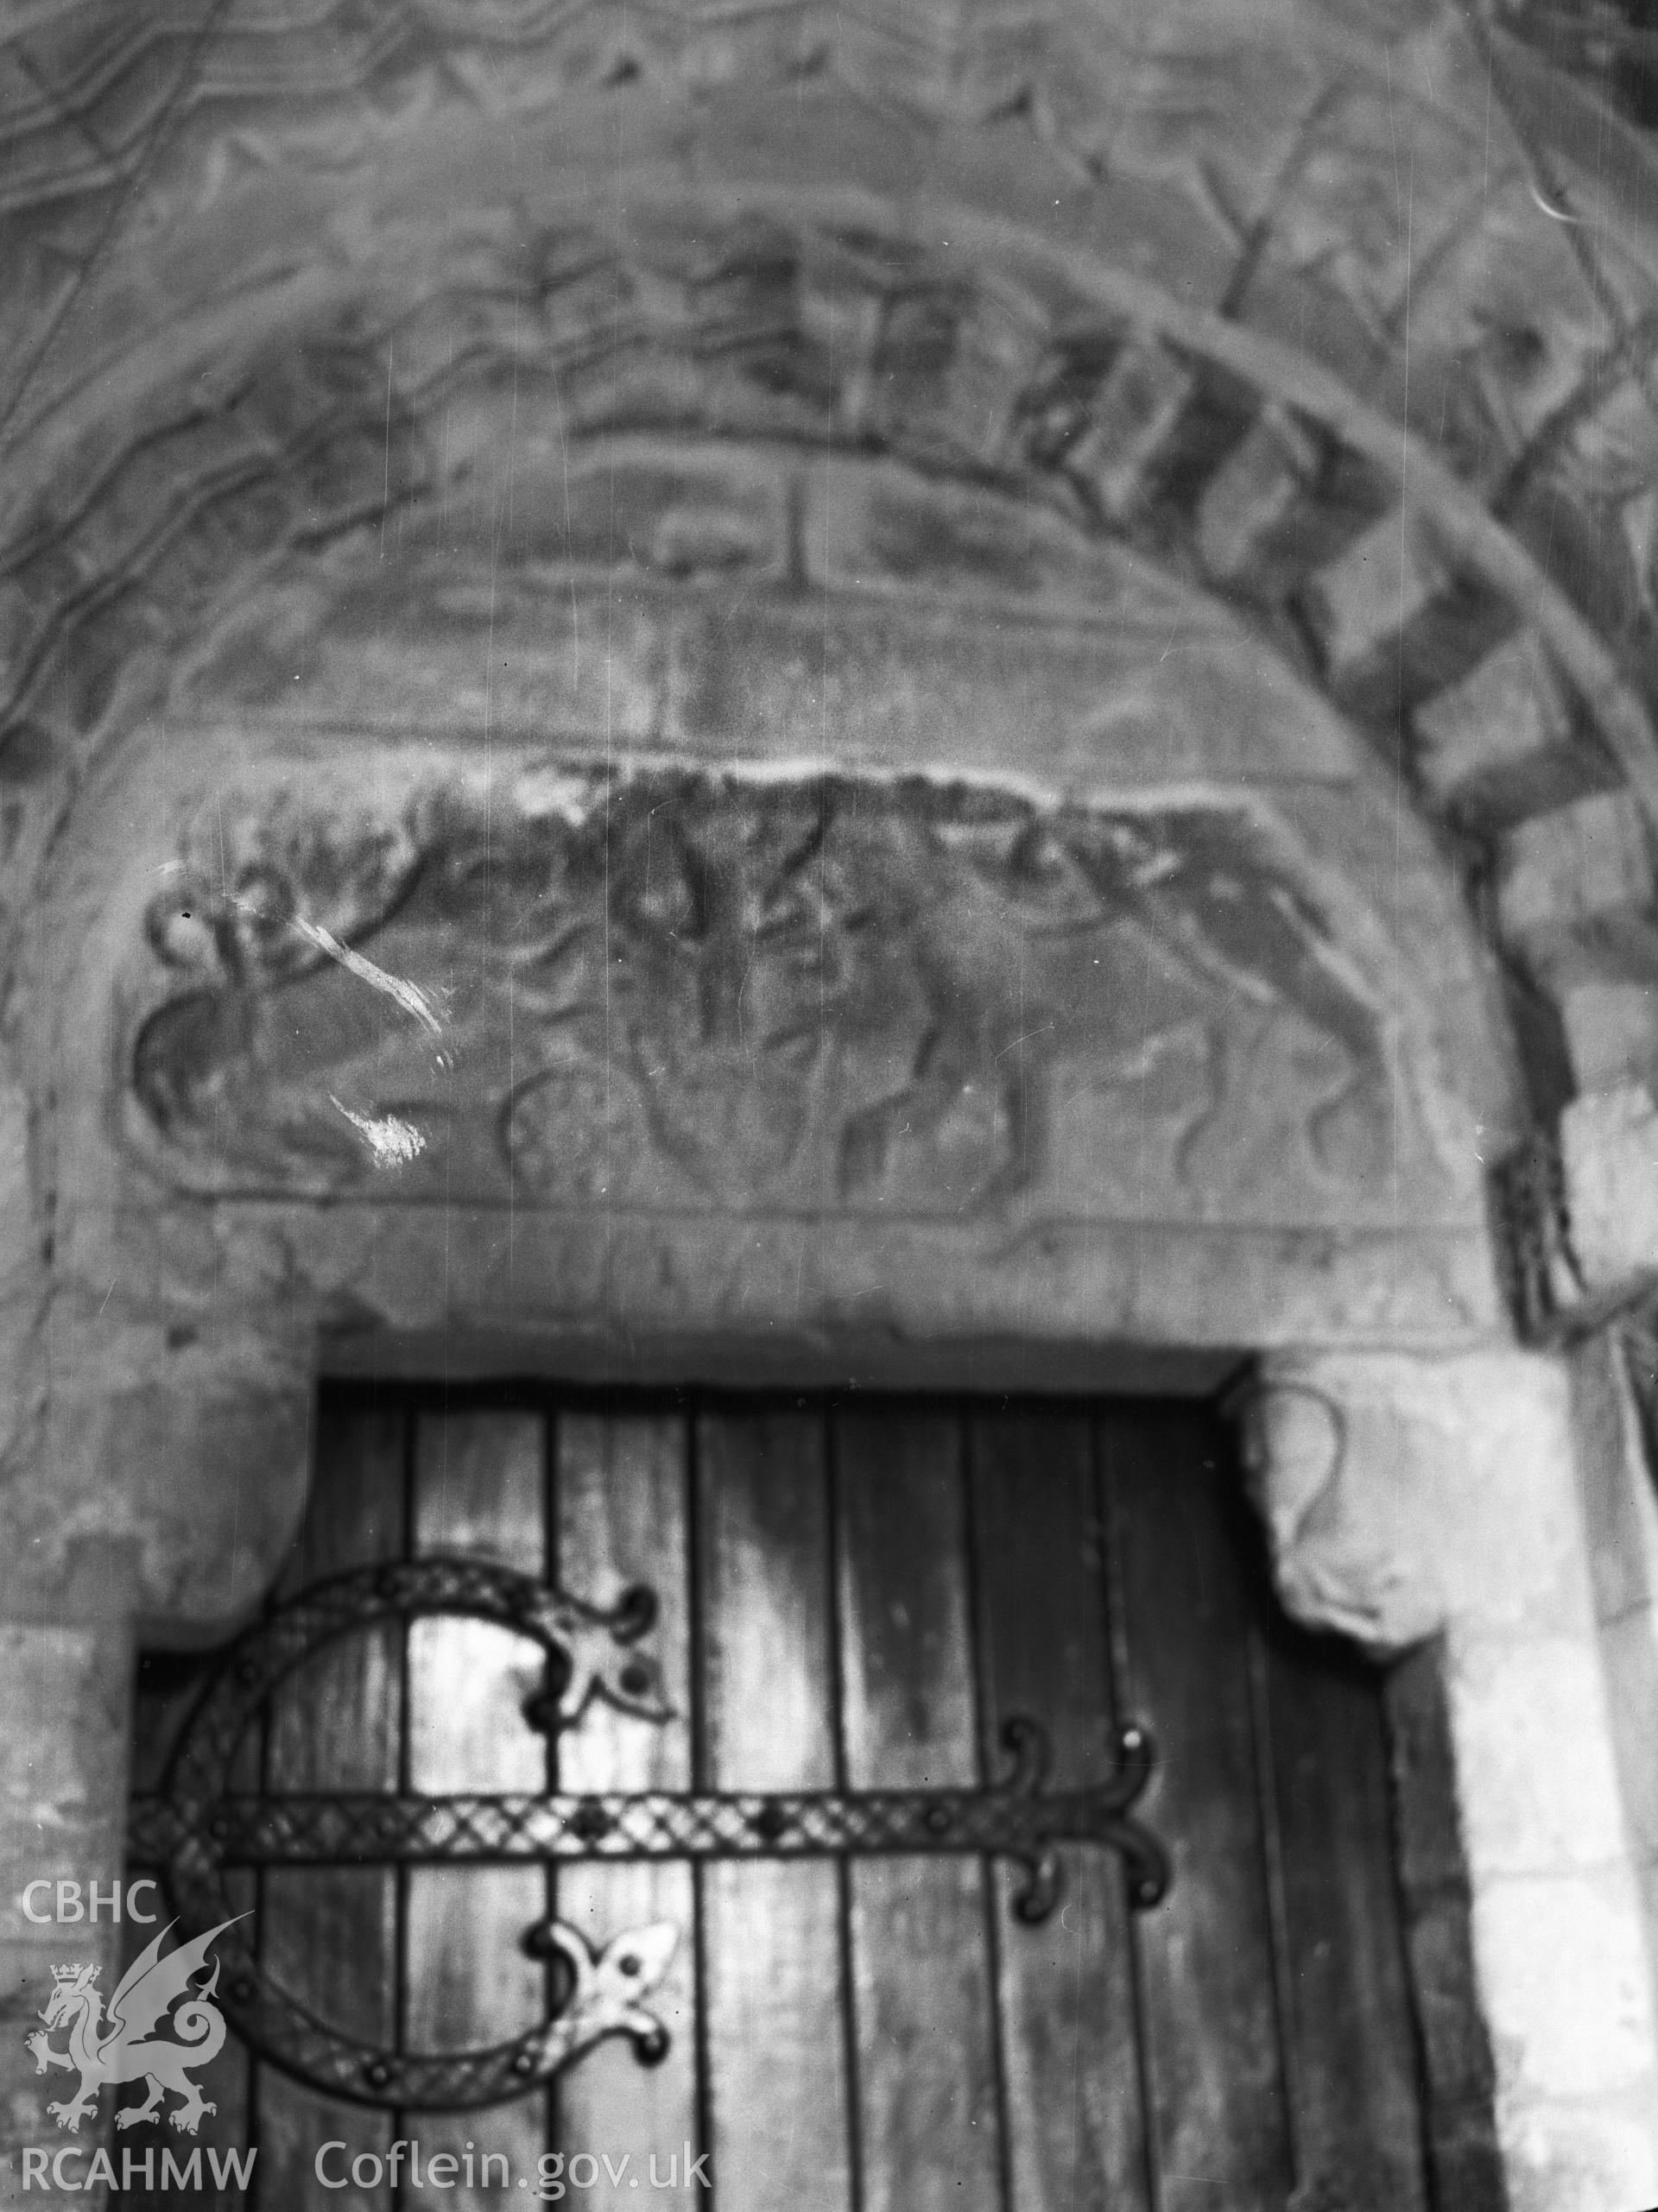 Digital copy of a nitrate negative showing interior view of carved tynpanum above Norman doorway, St Padarn's Church, Llanbadarn Fawr, Radnorshire. From the National Building Record Postcard Collection.